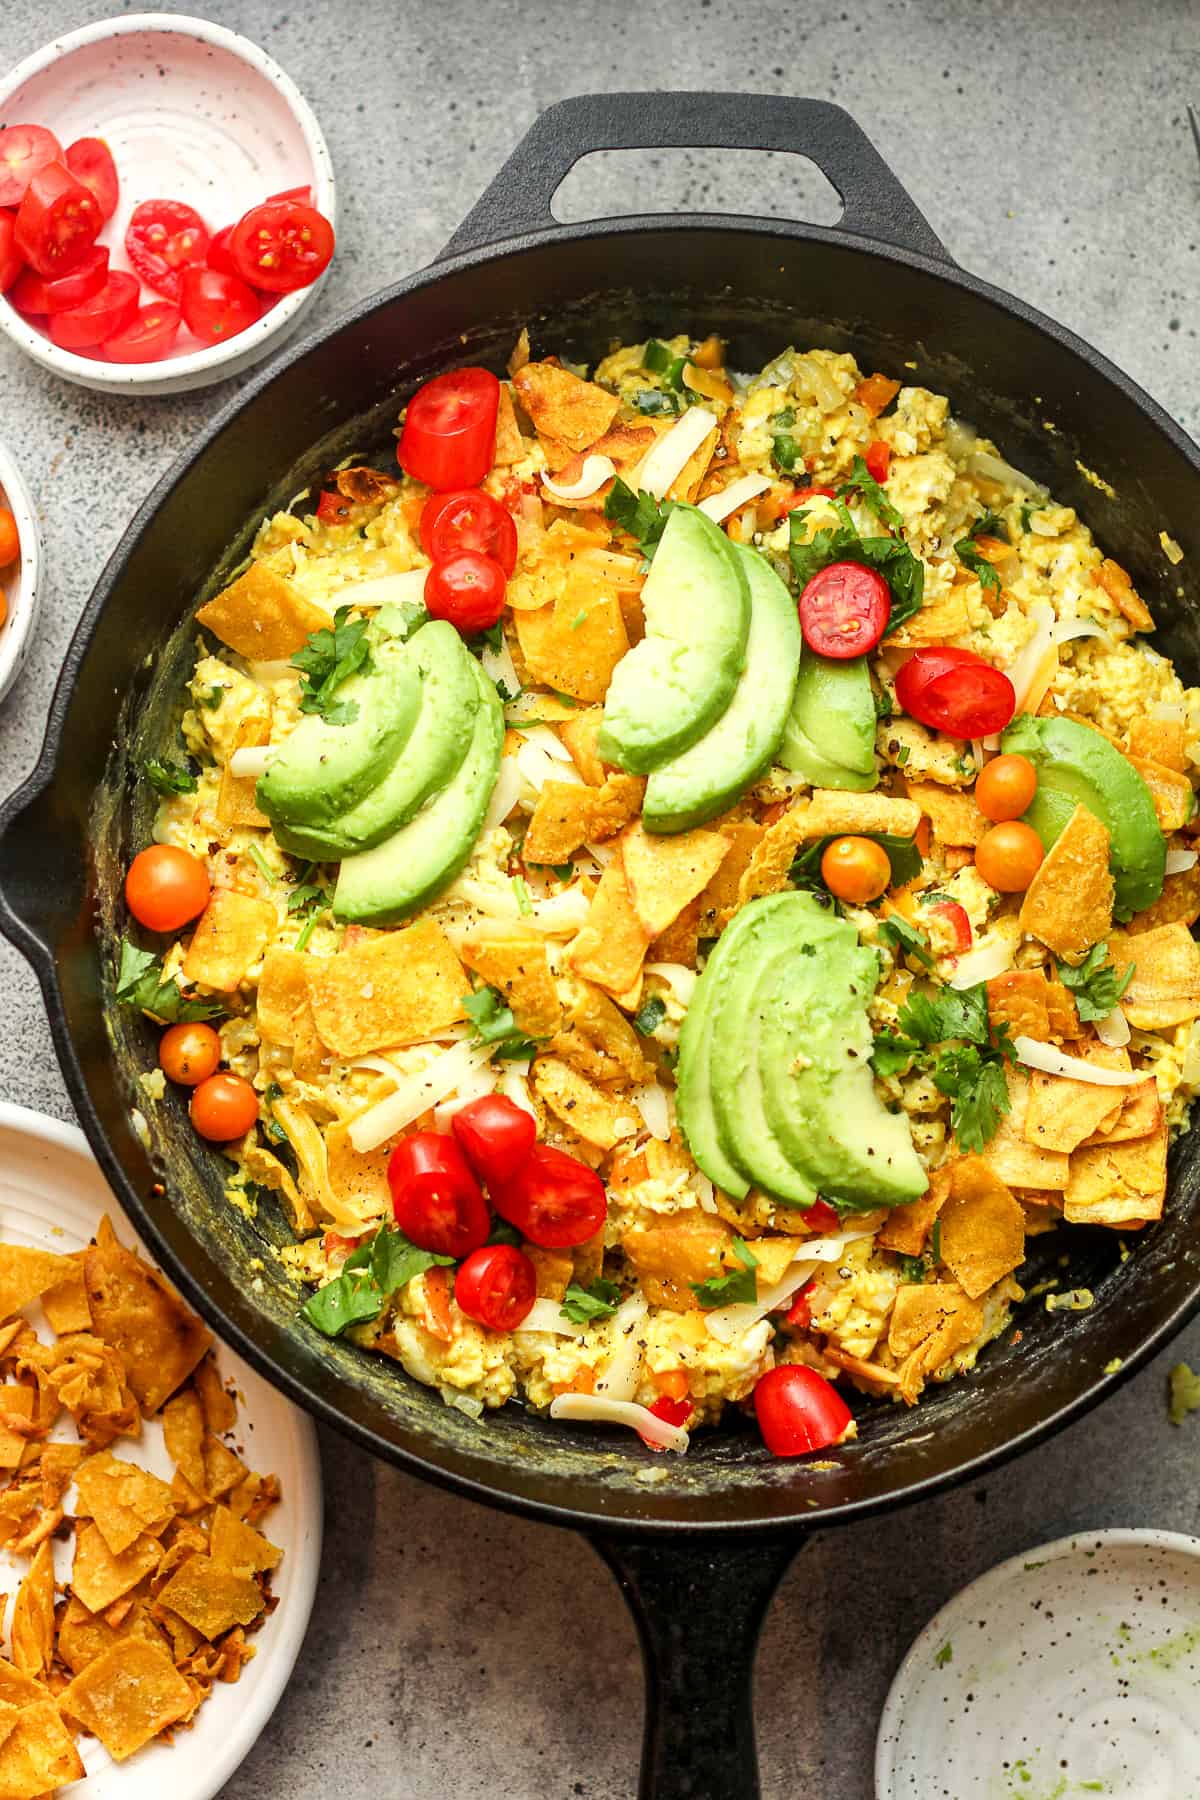 A Mexican Breakfast Skillet with avocado slices.